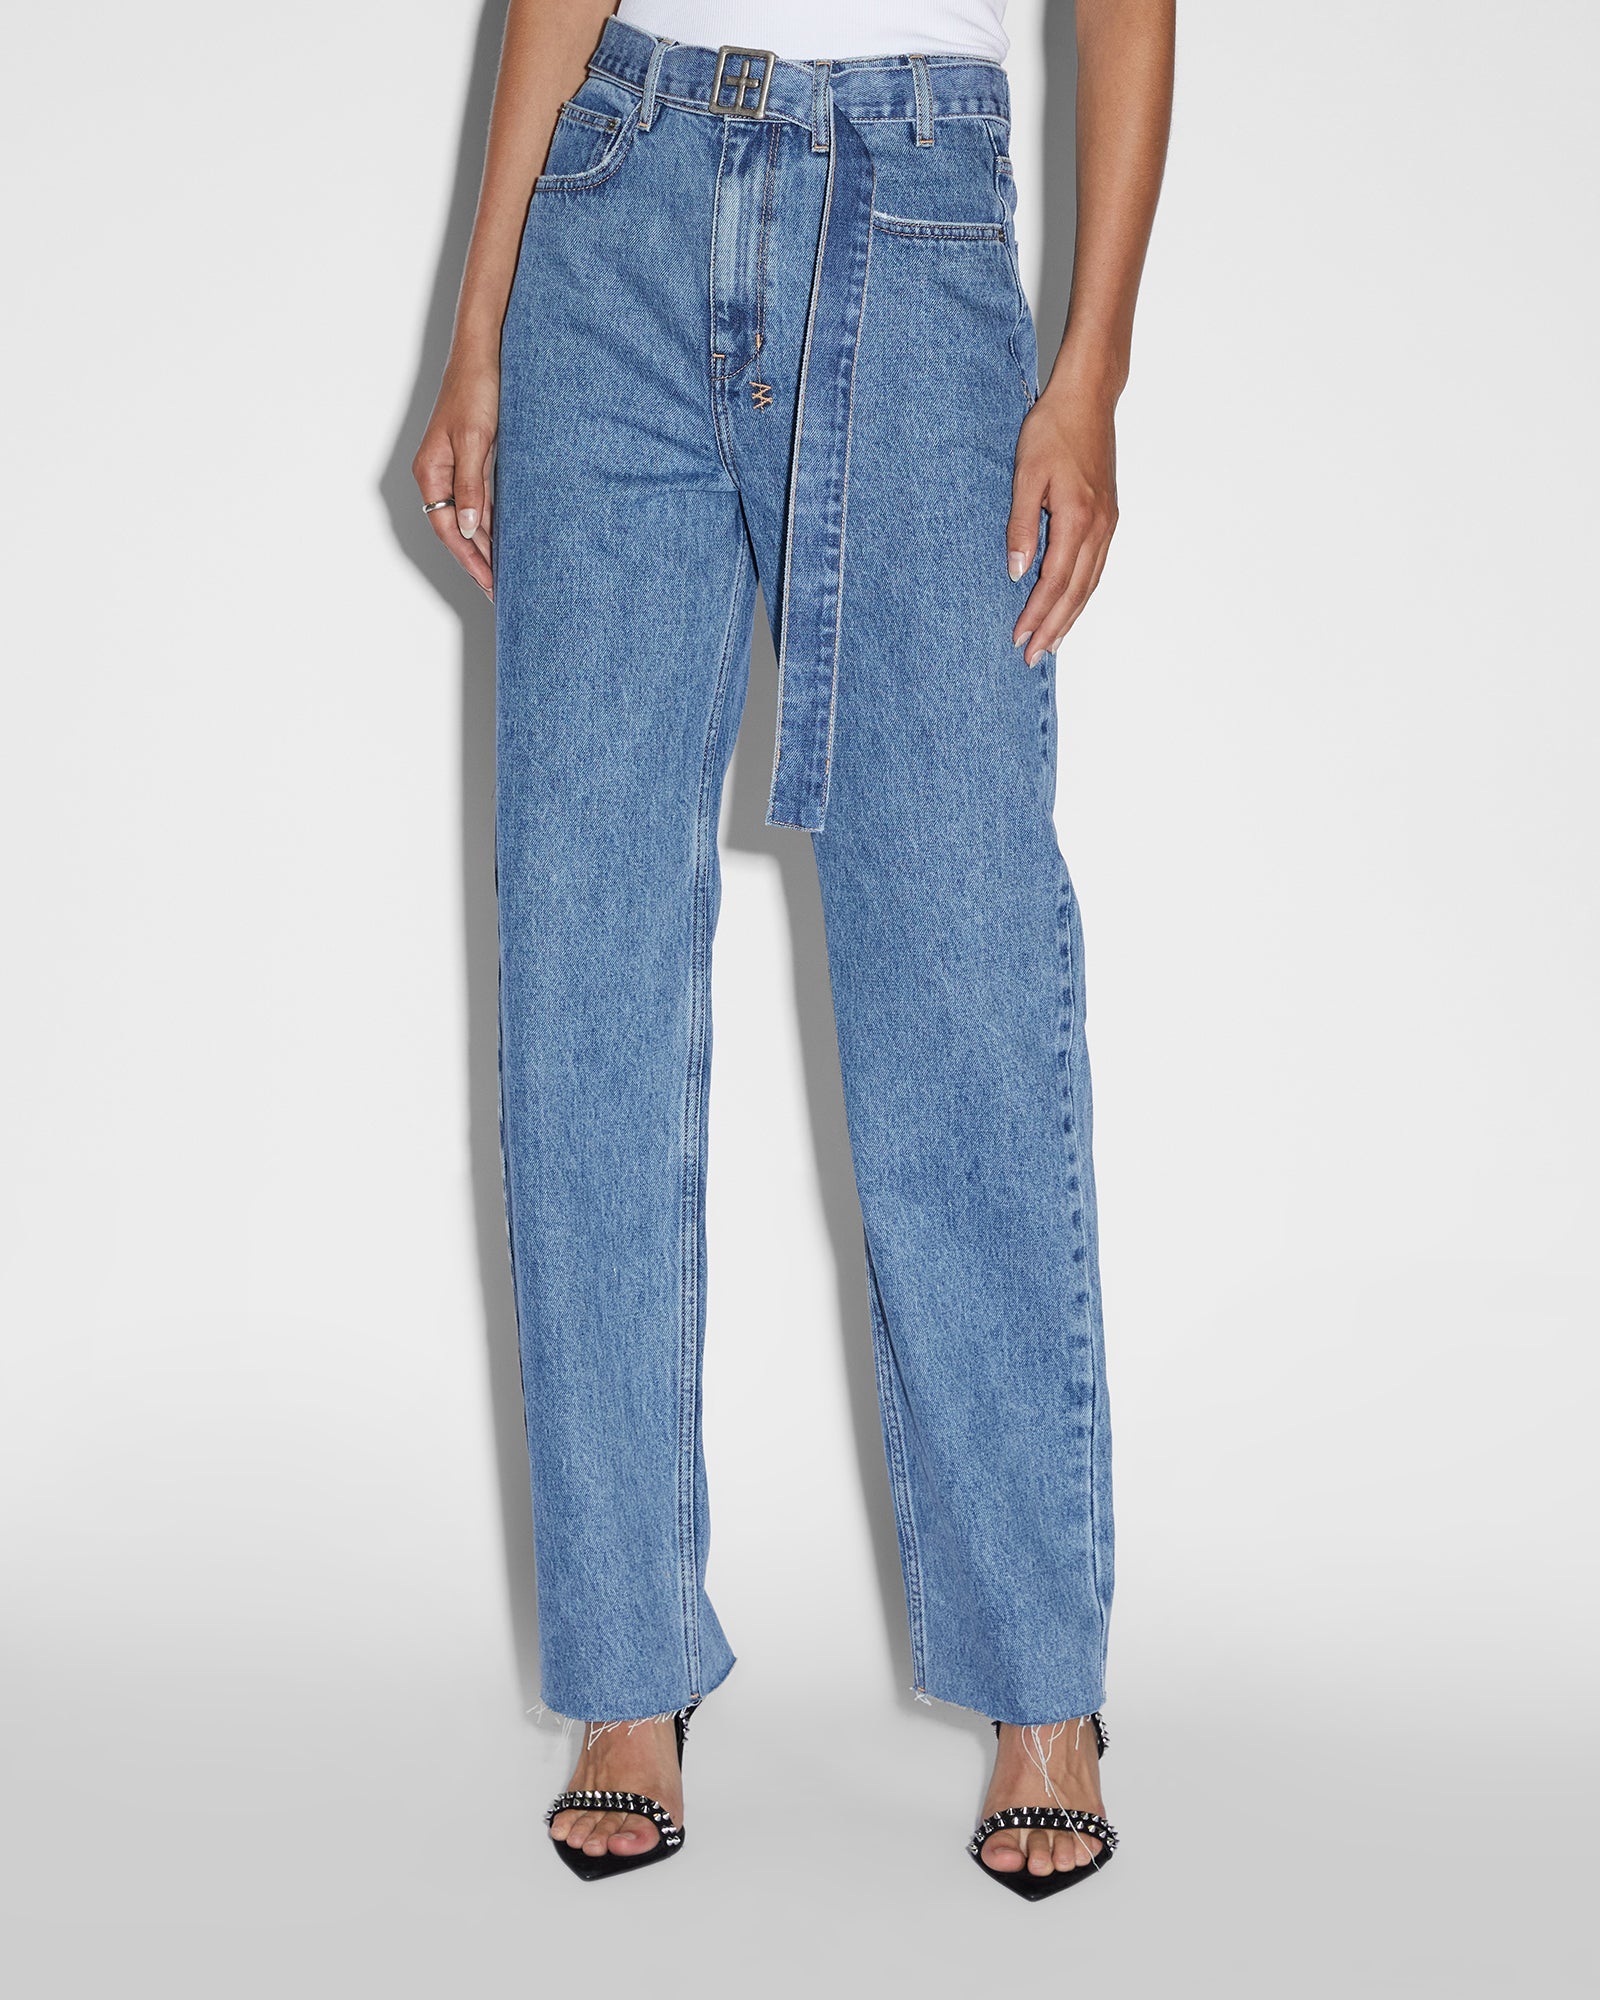 Women's High Waisted Jeans & High Rise Jeans